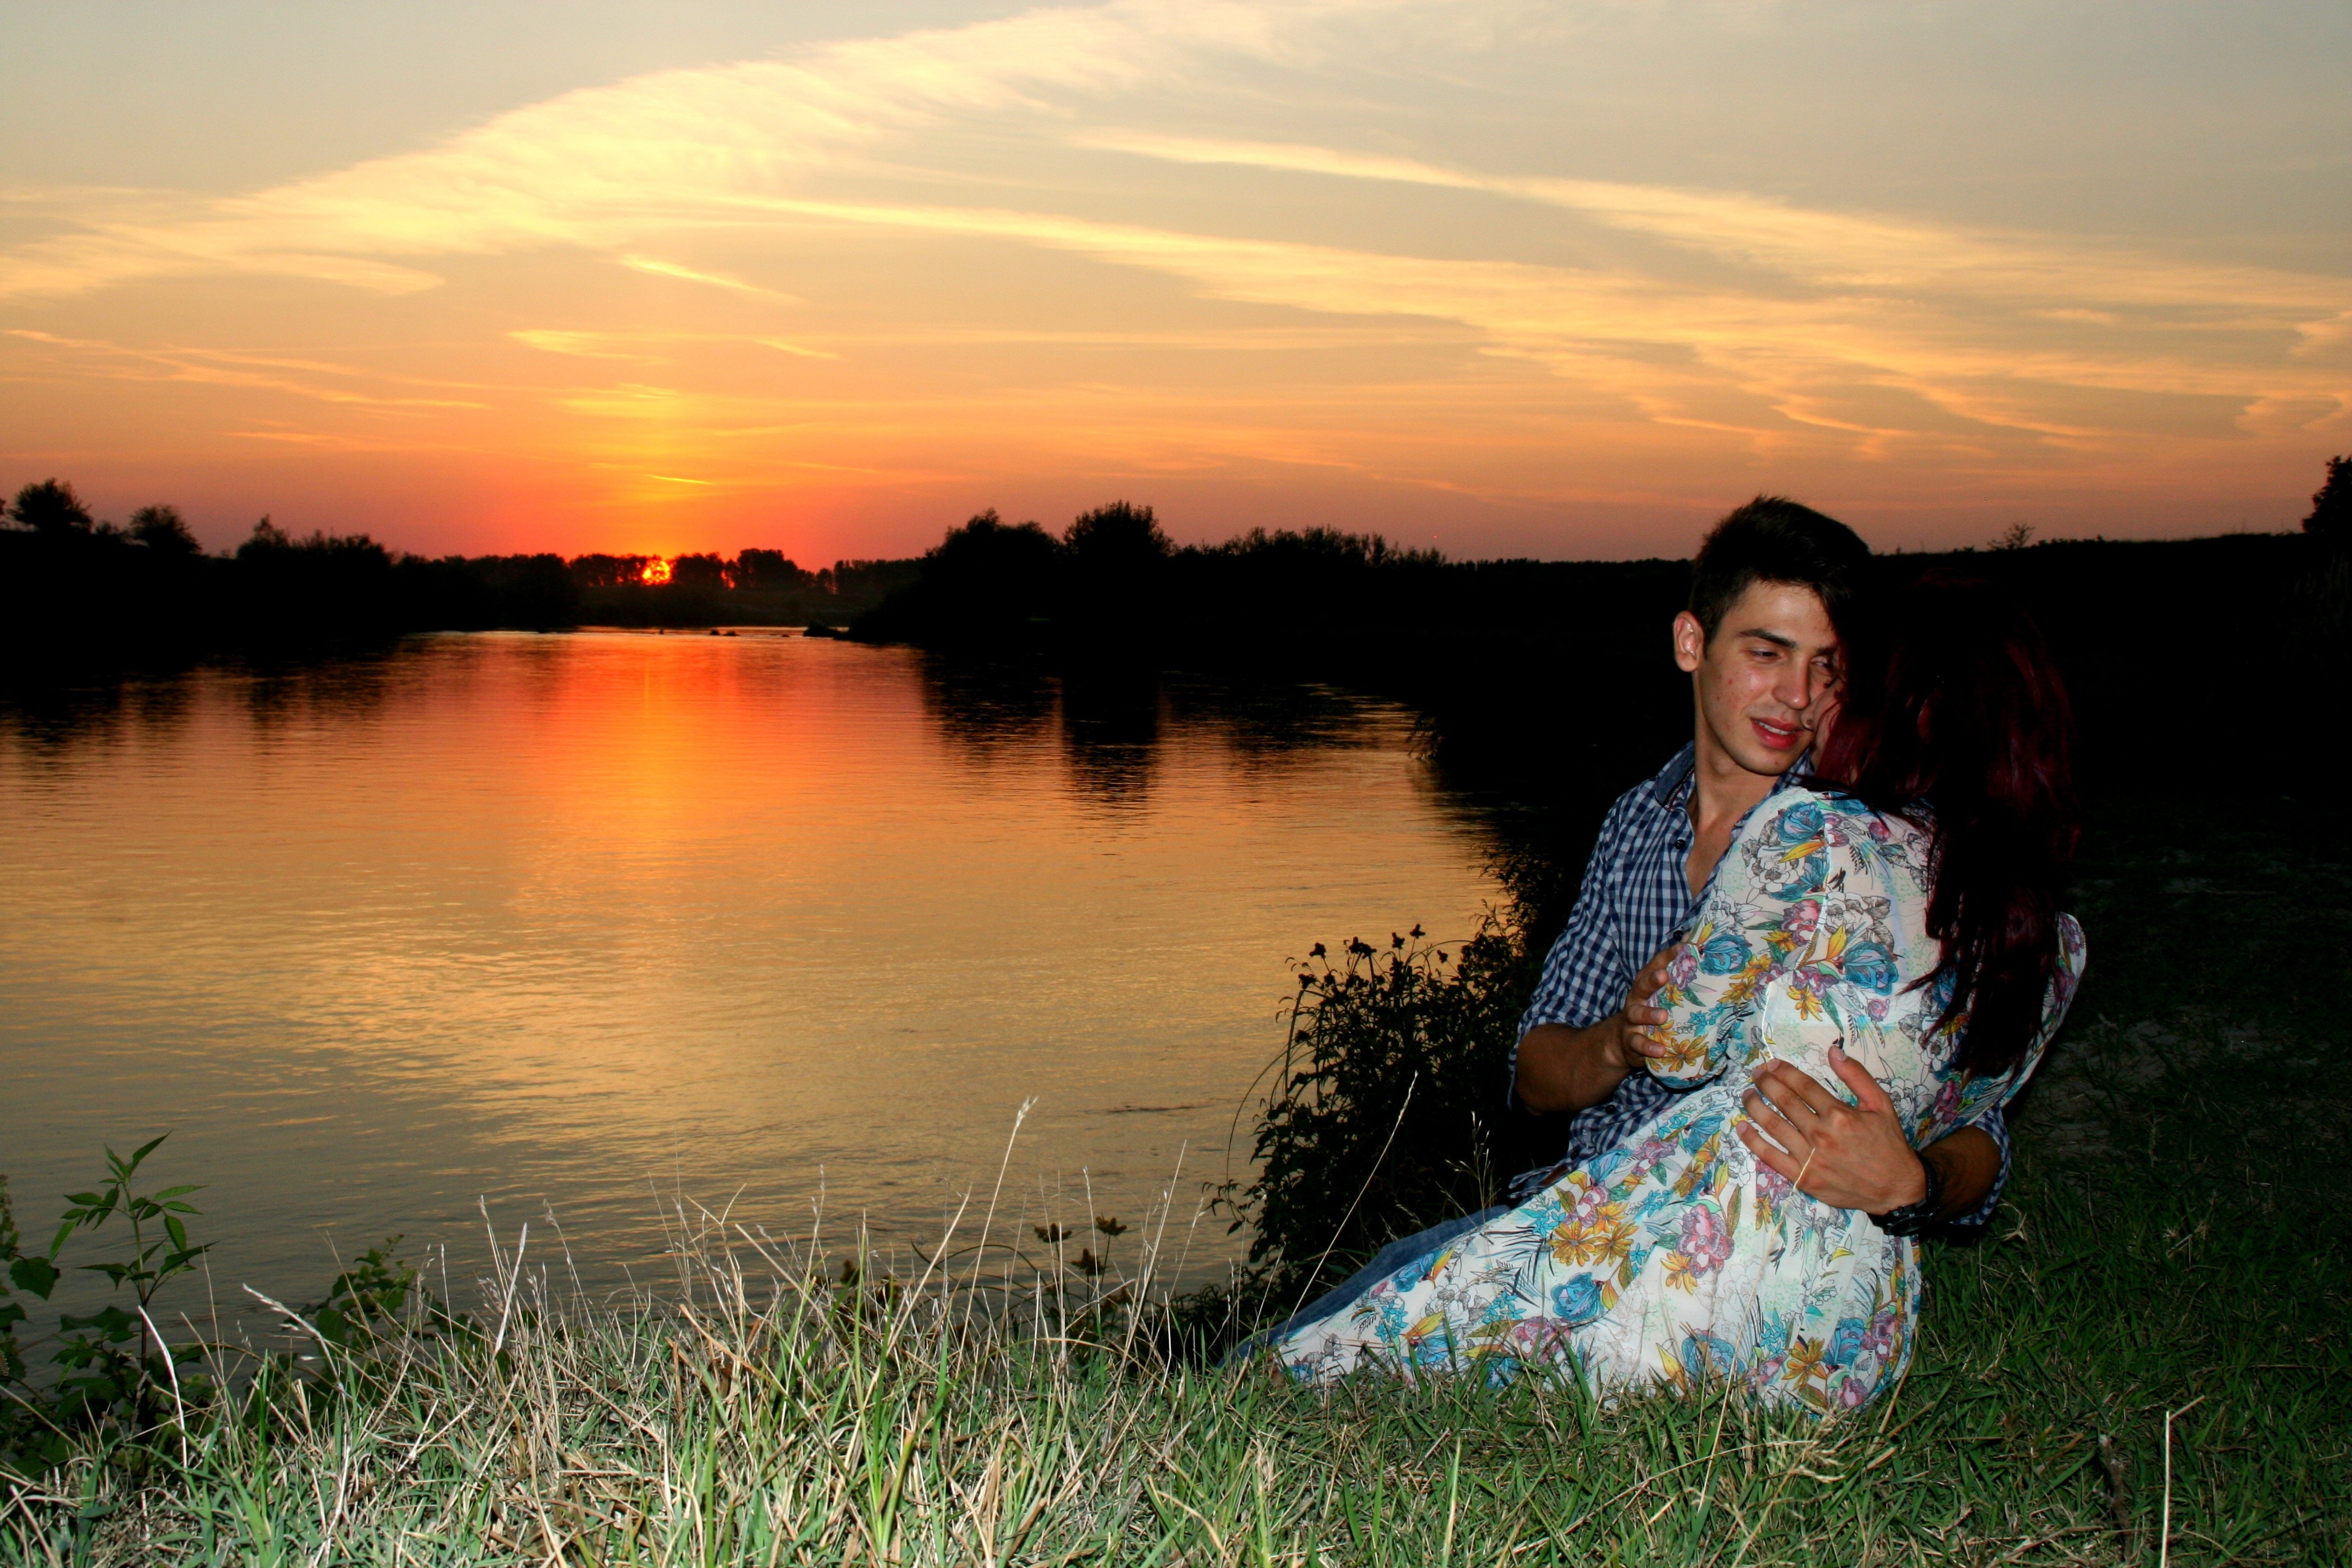 man and woman sitting in green grass